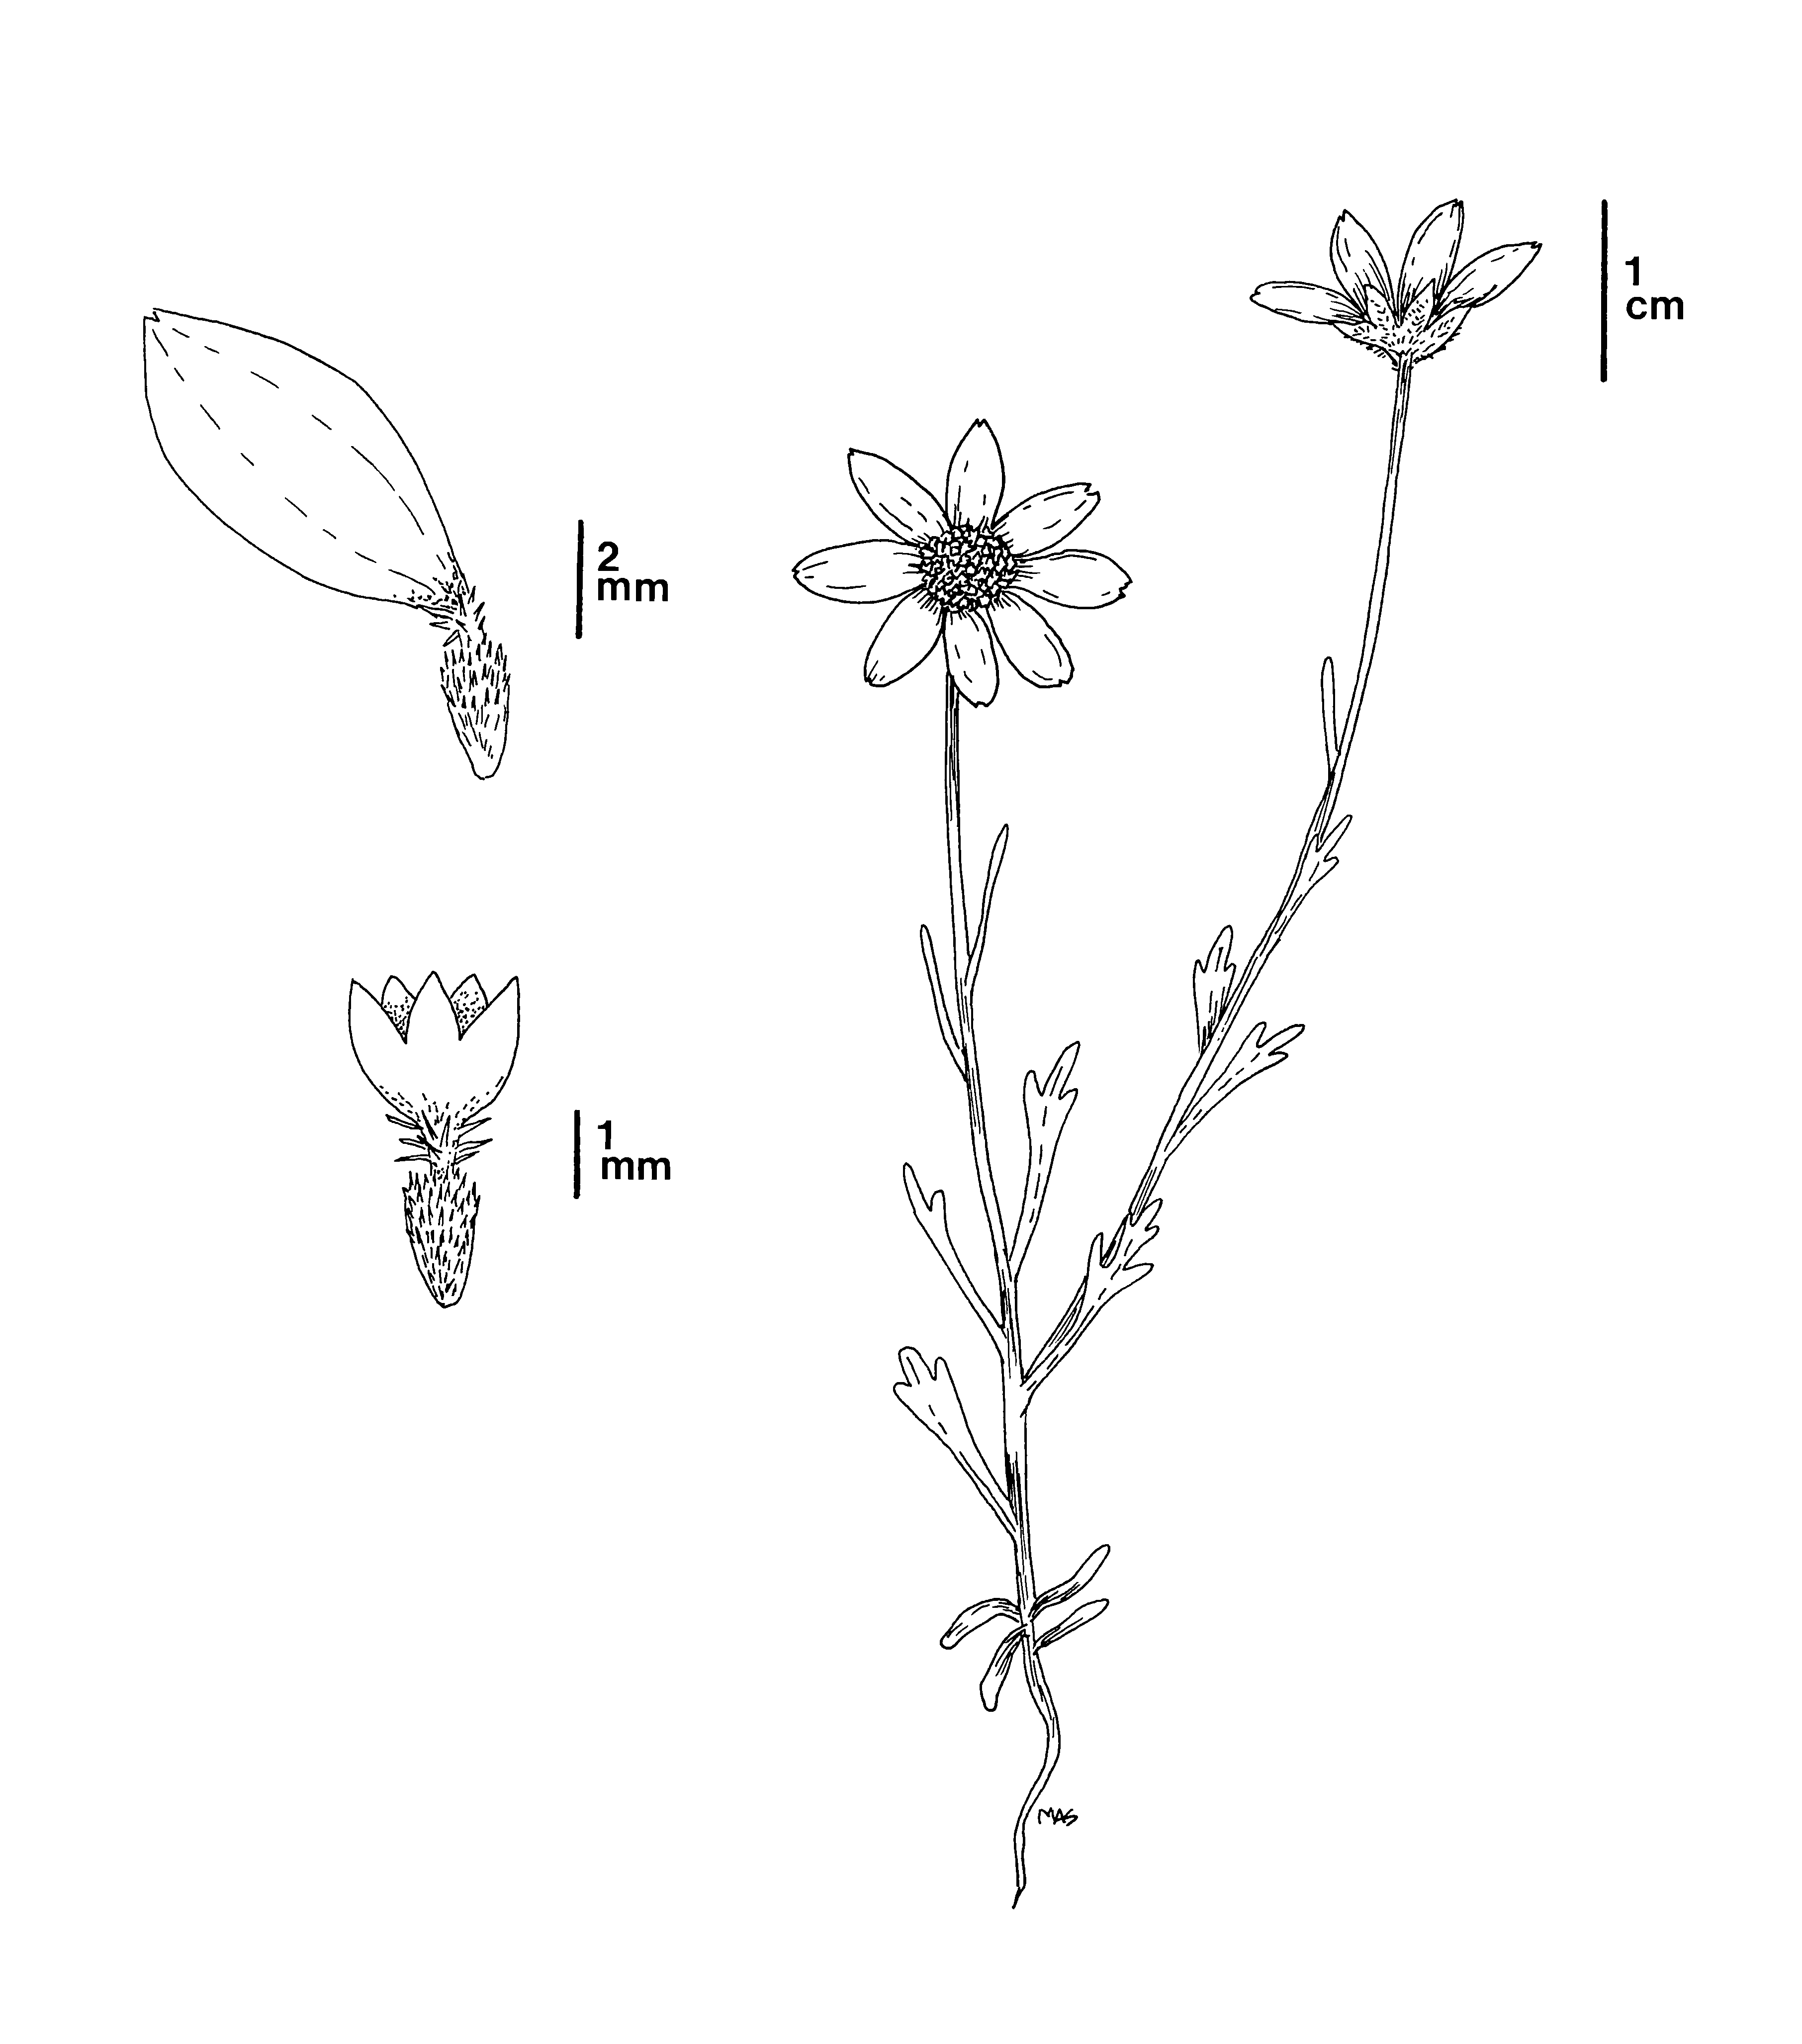 A black and white line-drawing illustration showing a plant with two flower heads and leaves with small lobes. The illustration also includes enlarged drawings of a disk flower and a ray flower - link opens in new window